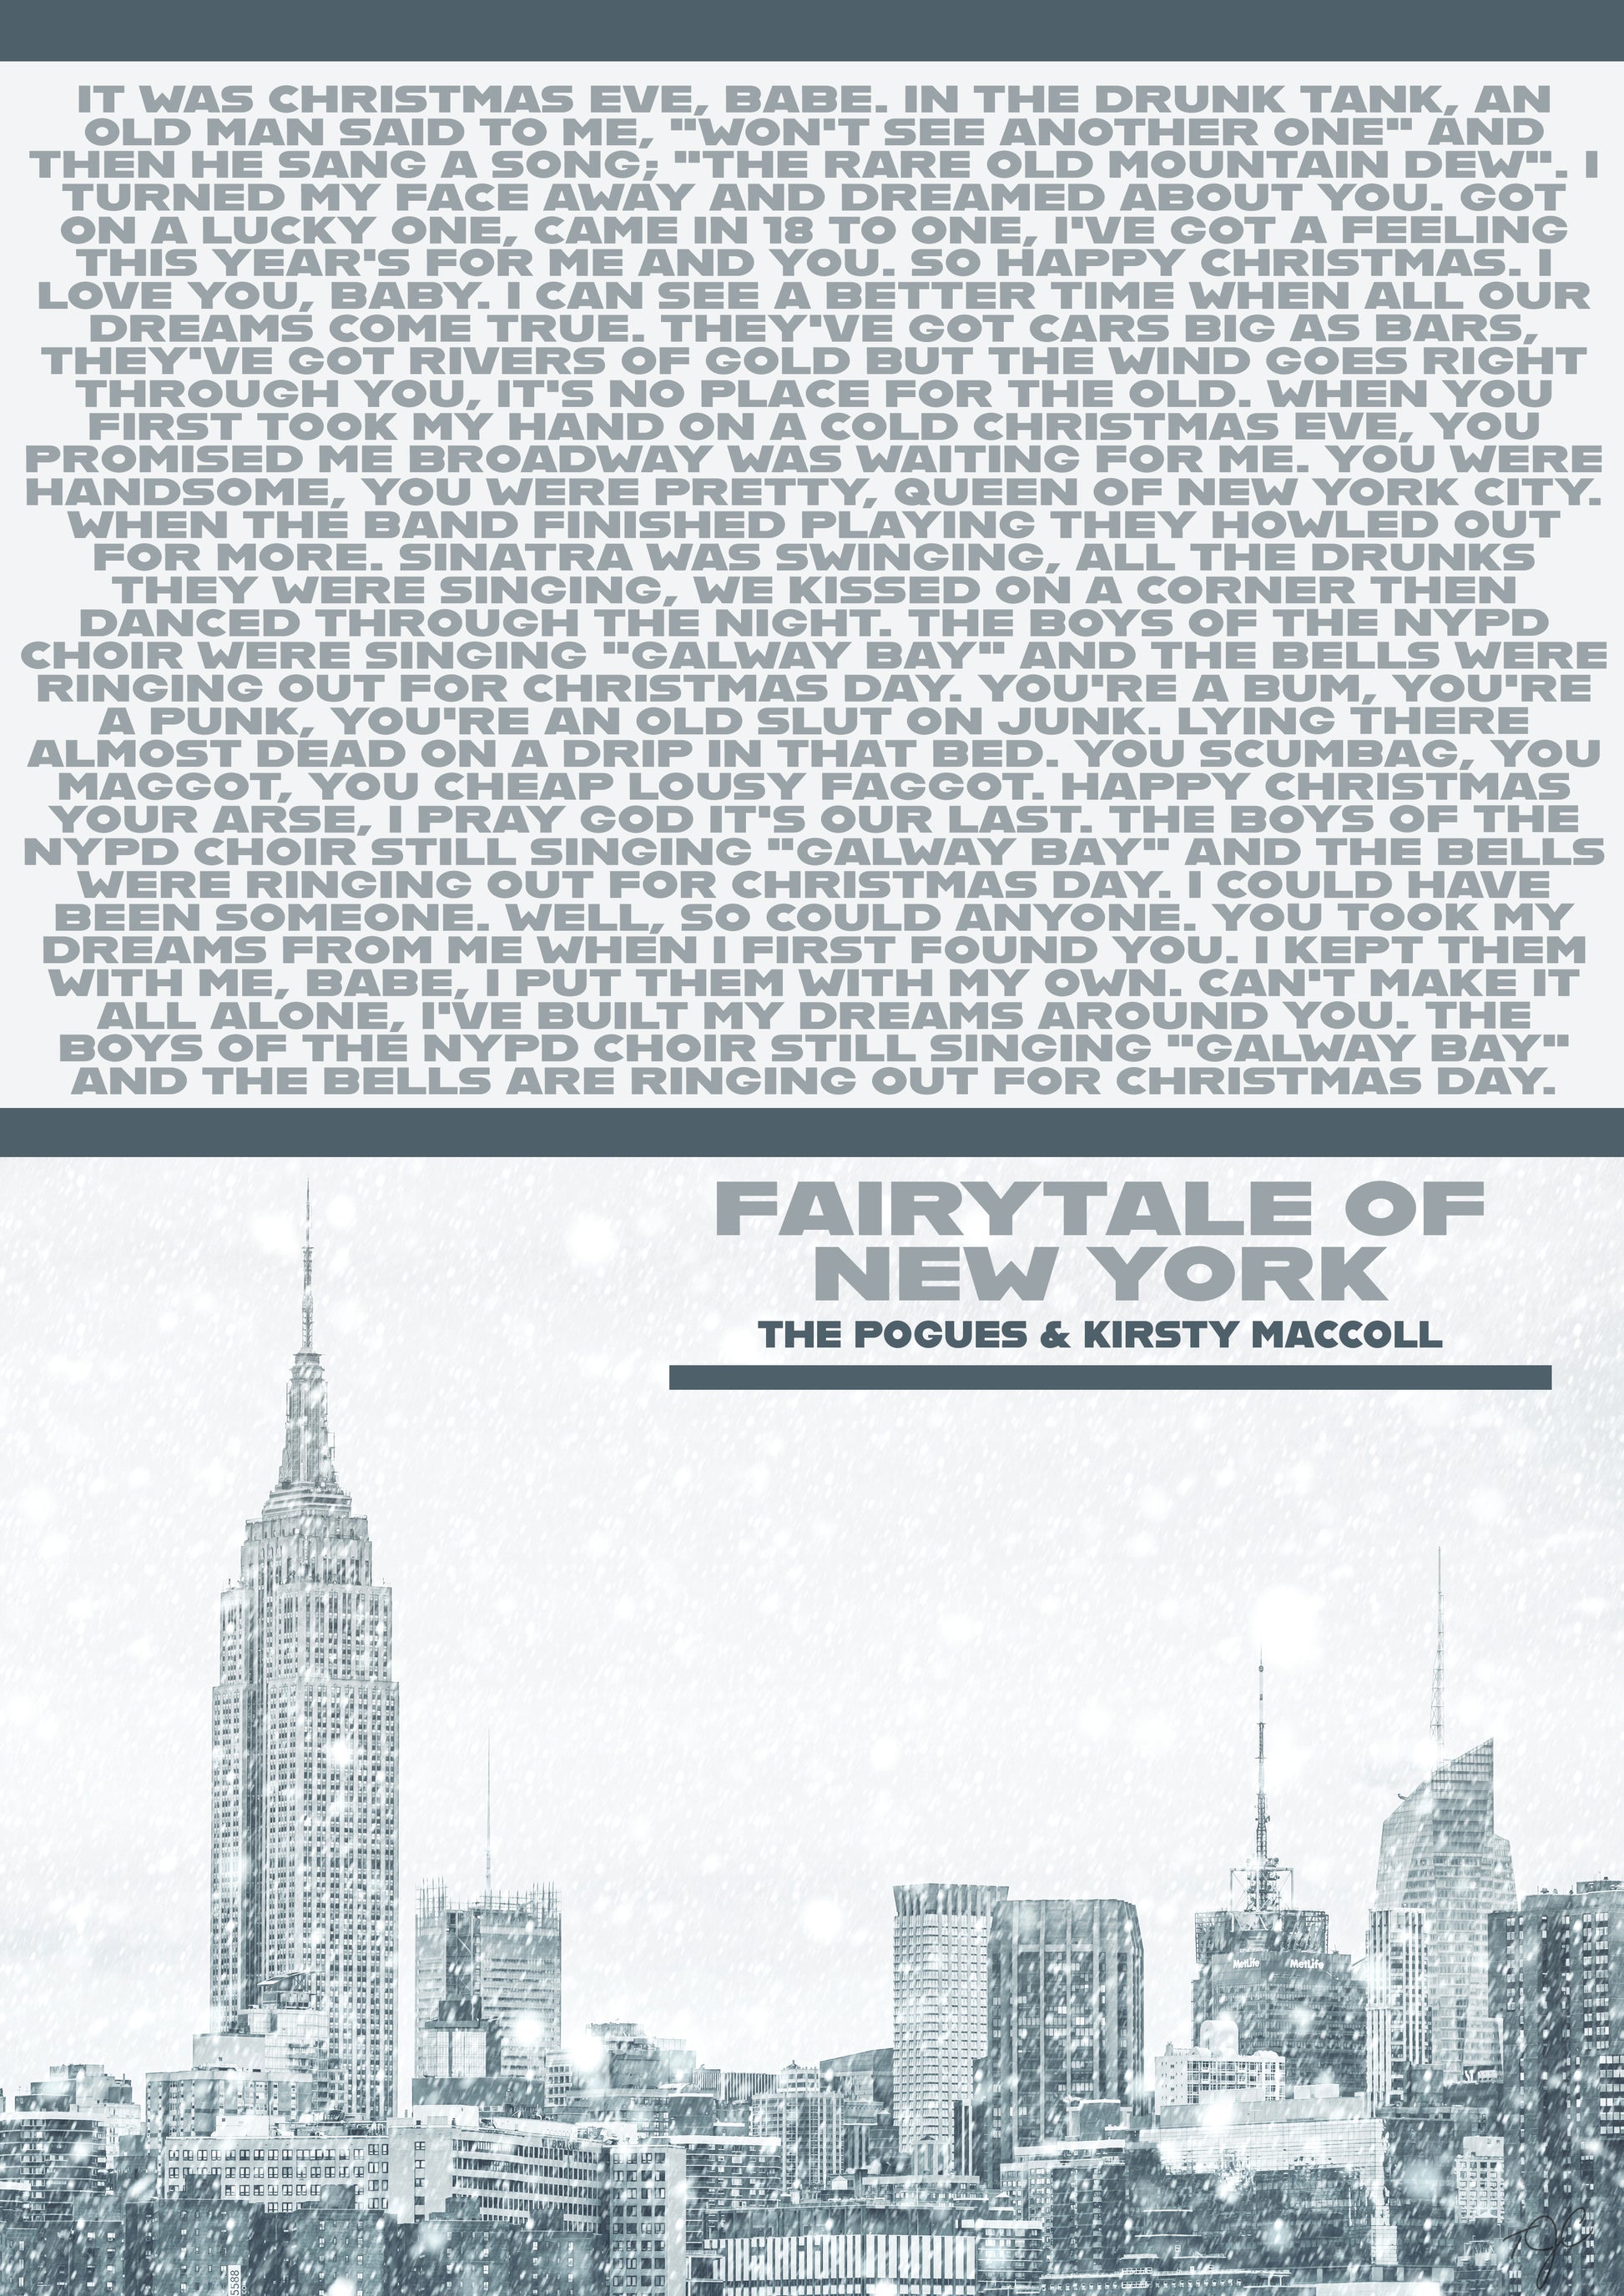 Fairytale of New York - The Pogues & Kirsty MacColl - Art print